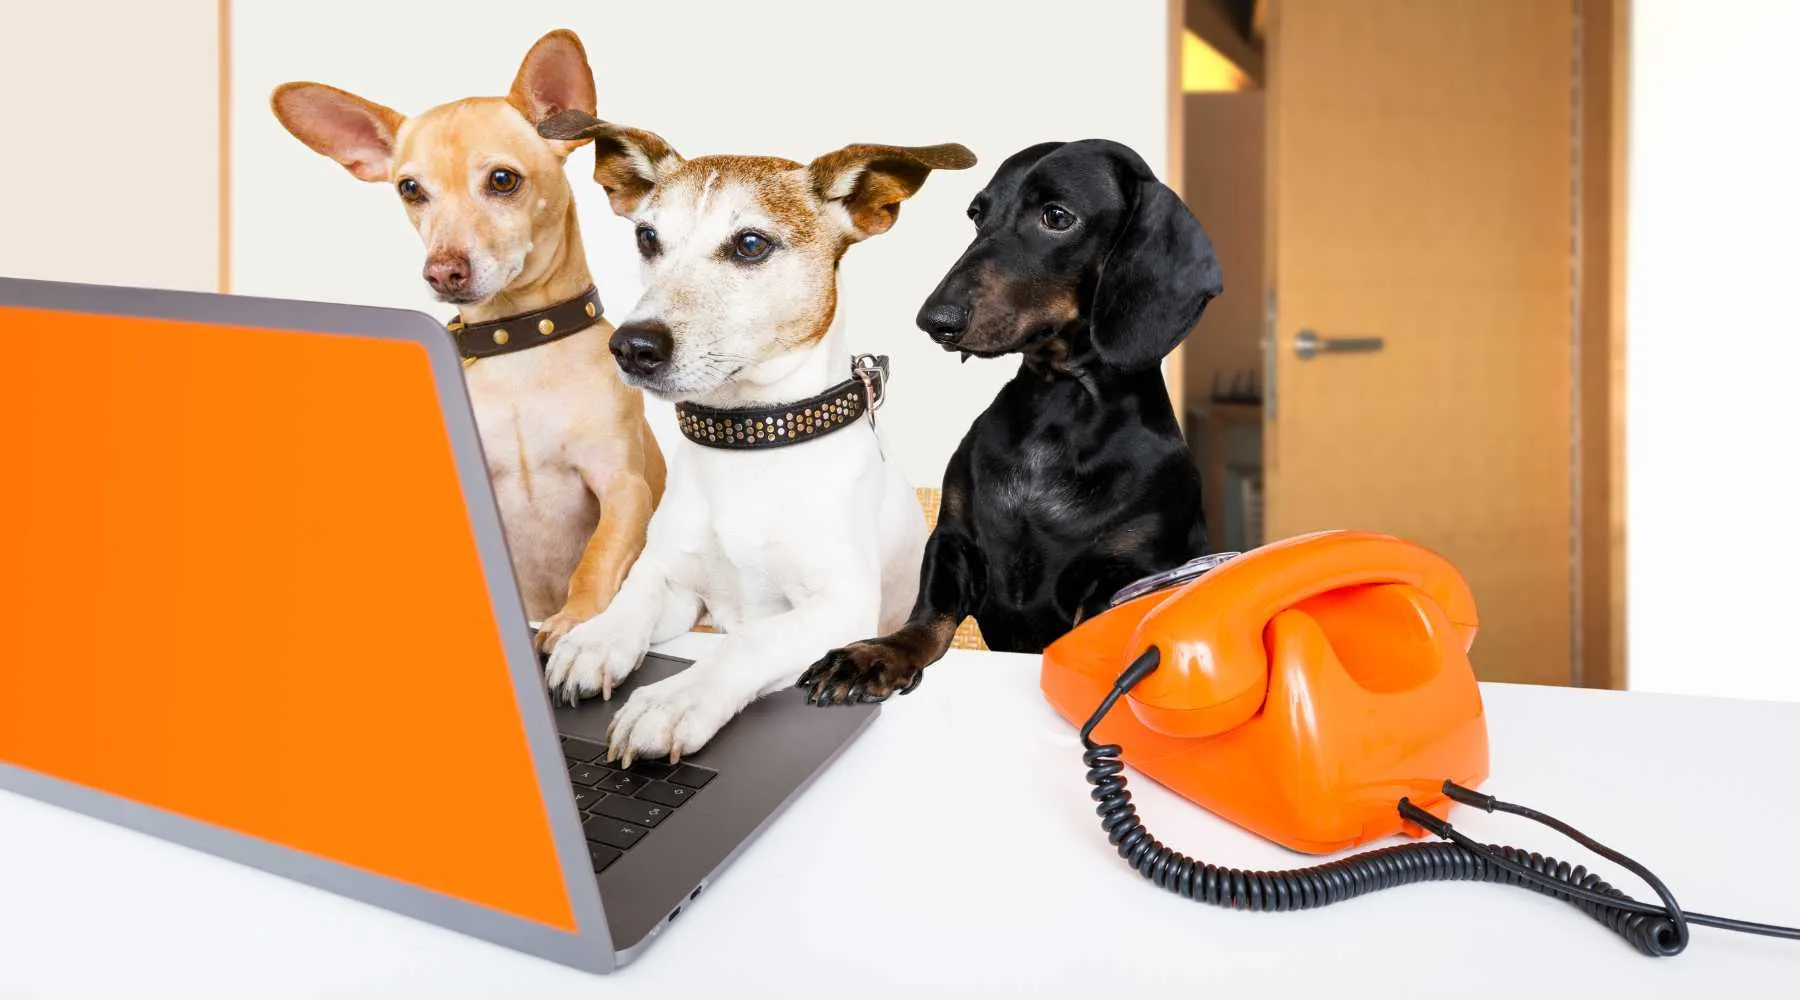 3 dogs using a landline phone and the internet on a laptop